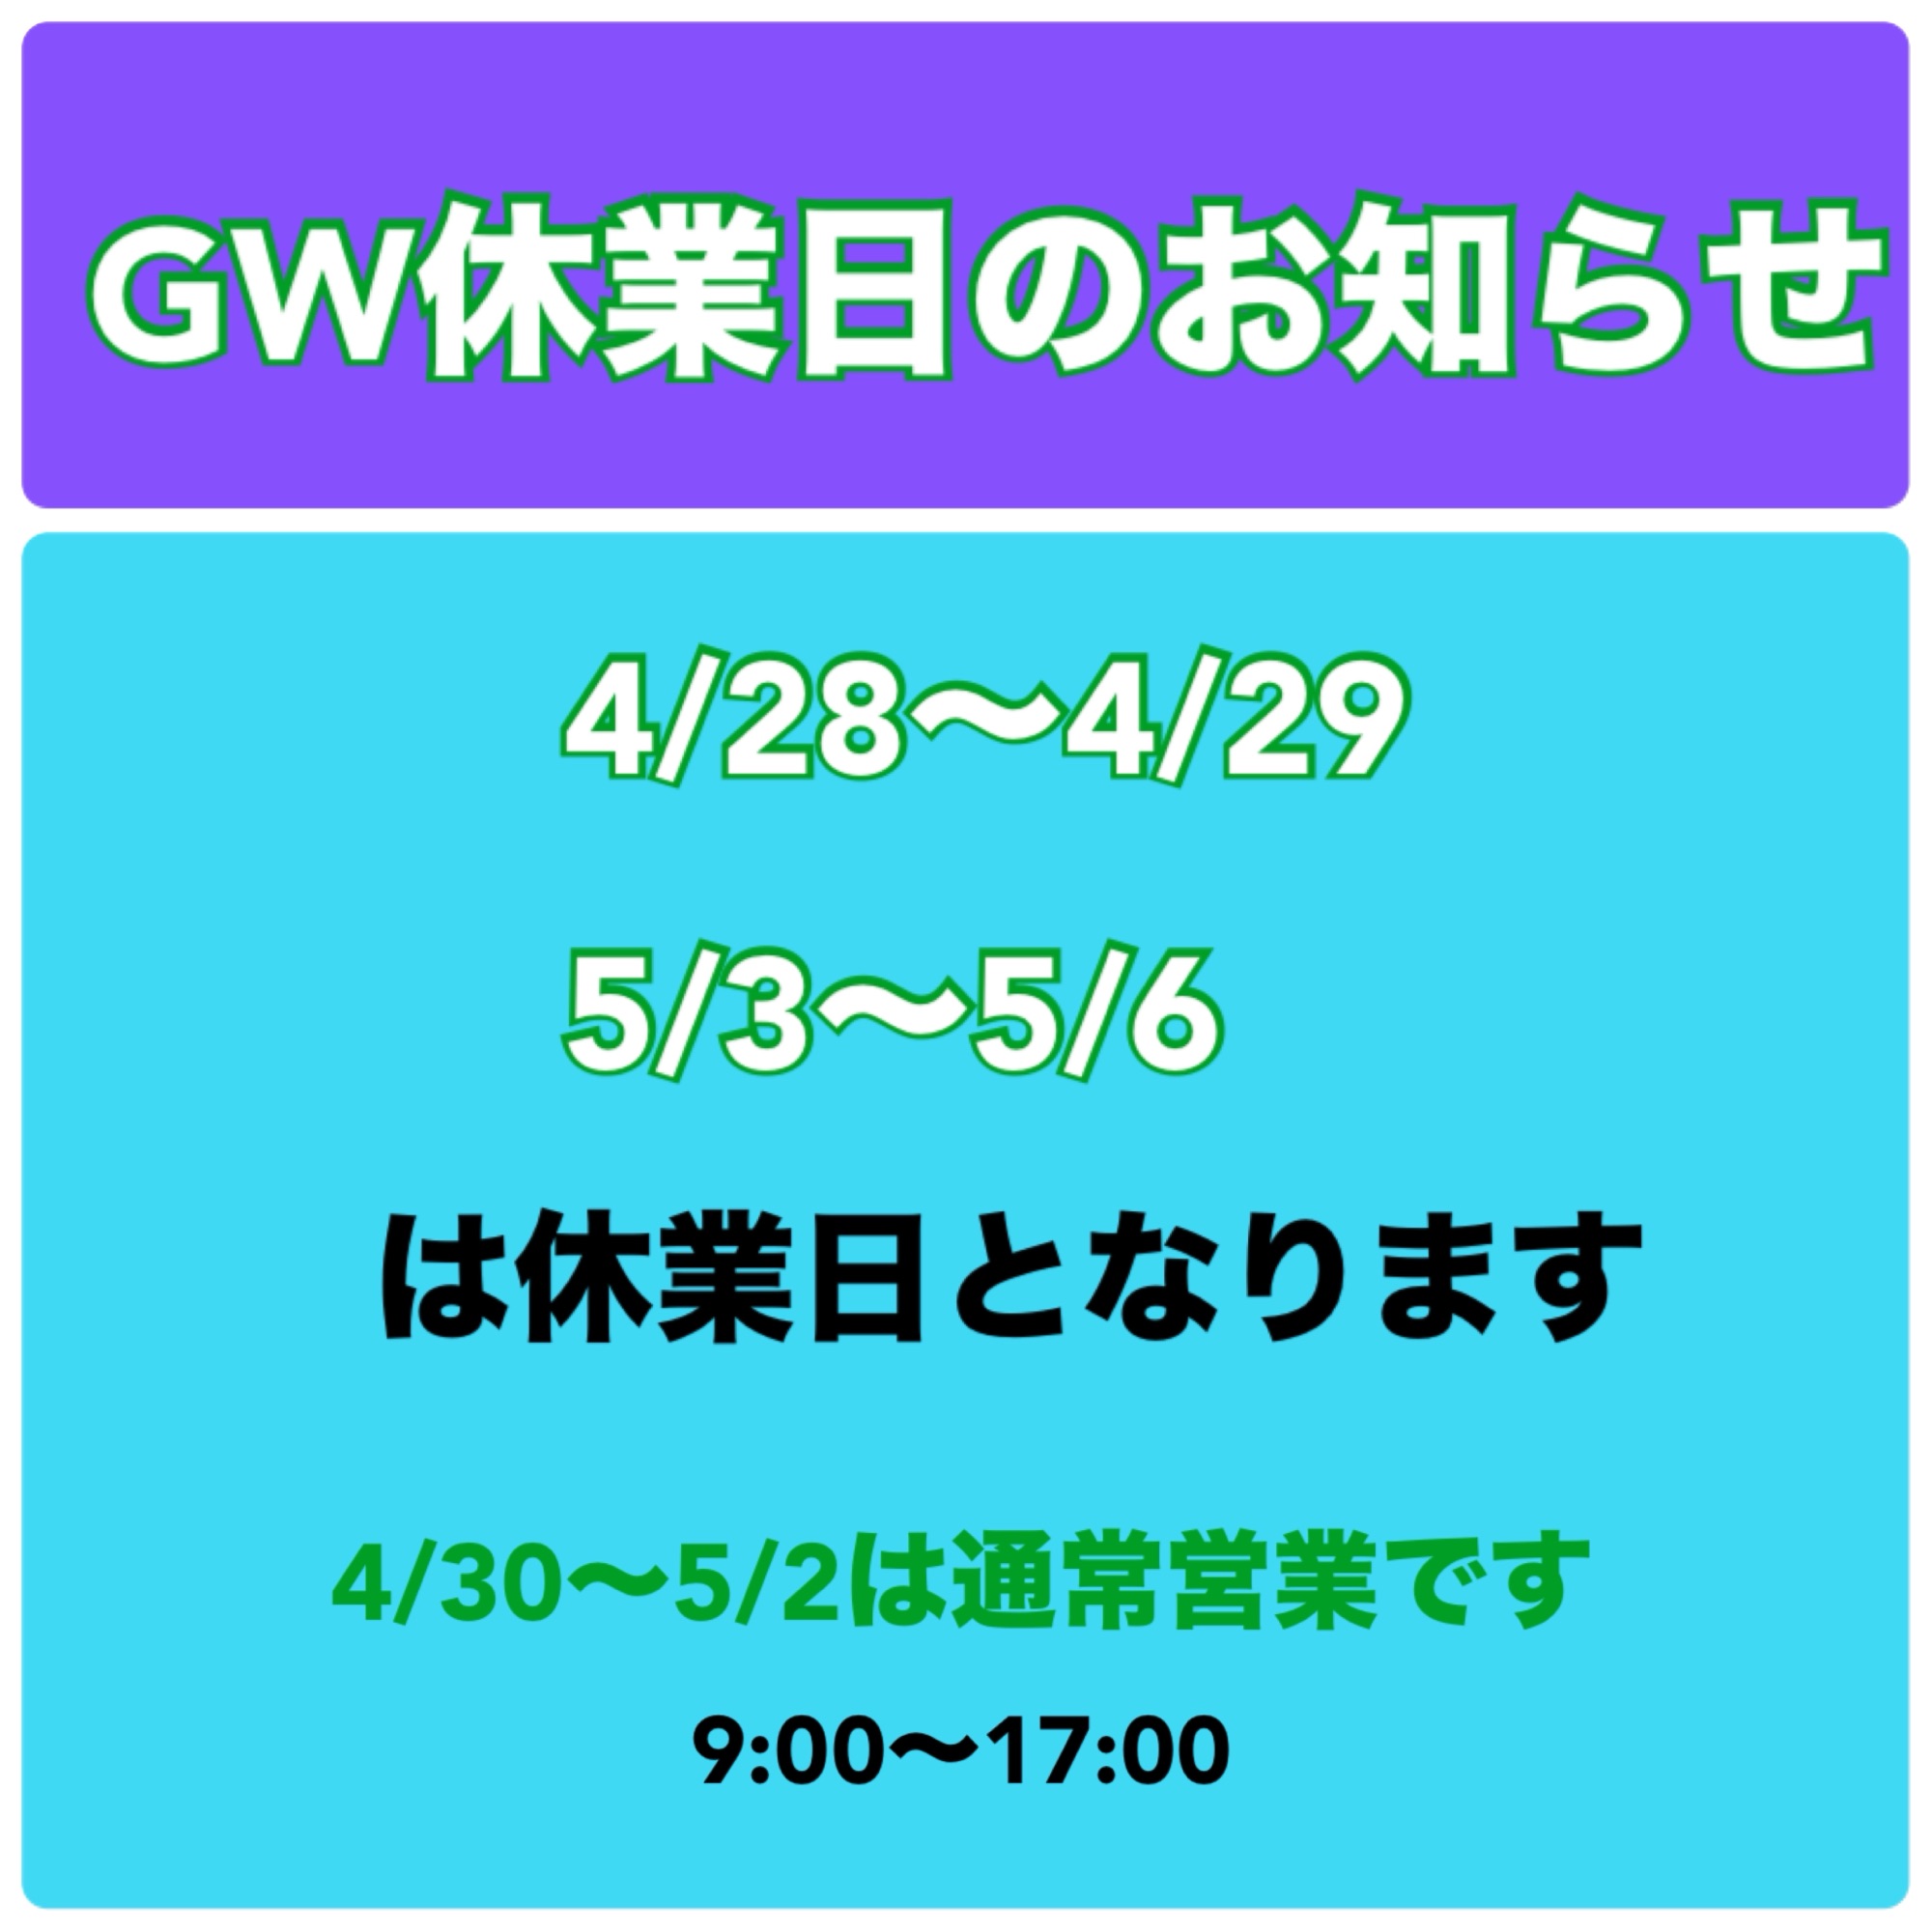 You are currently viewing GW休業日のお知らせ